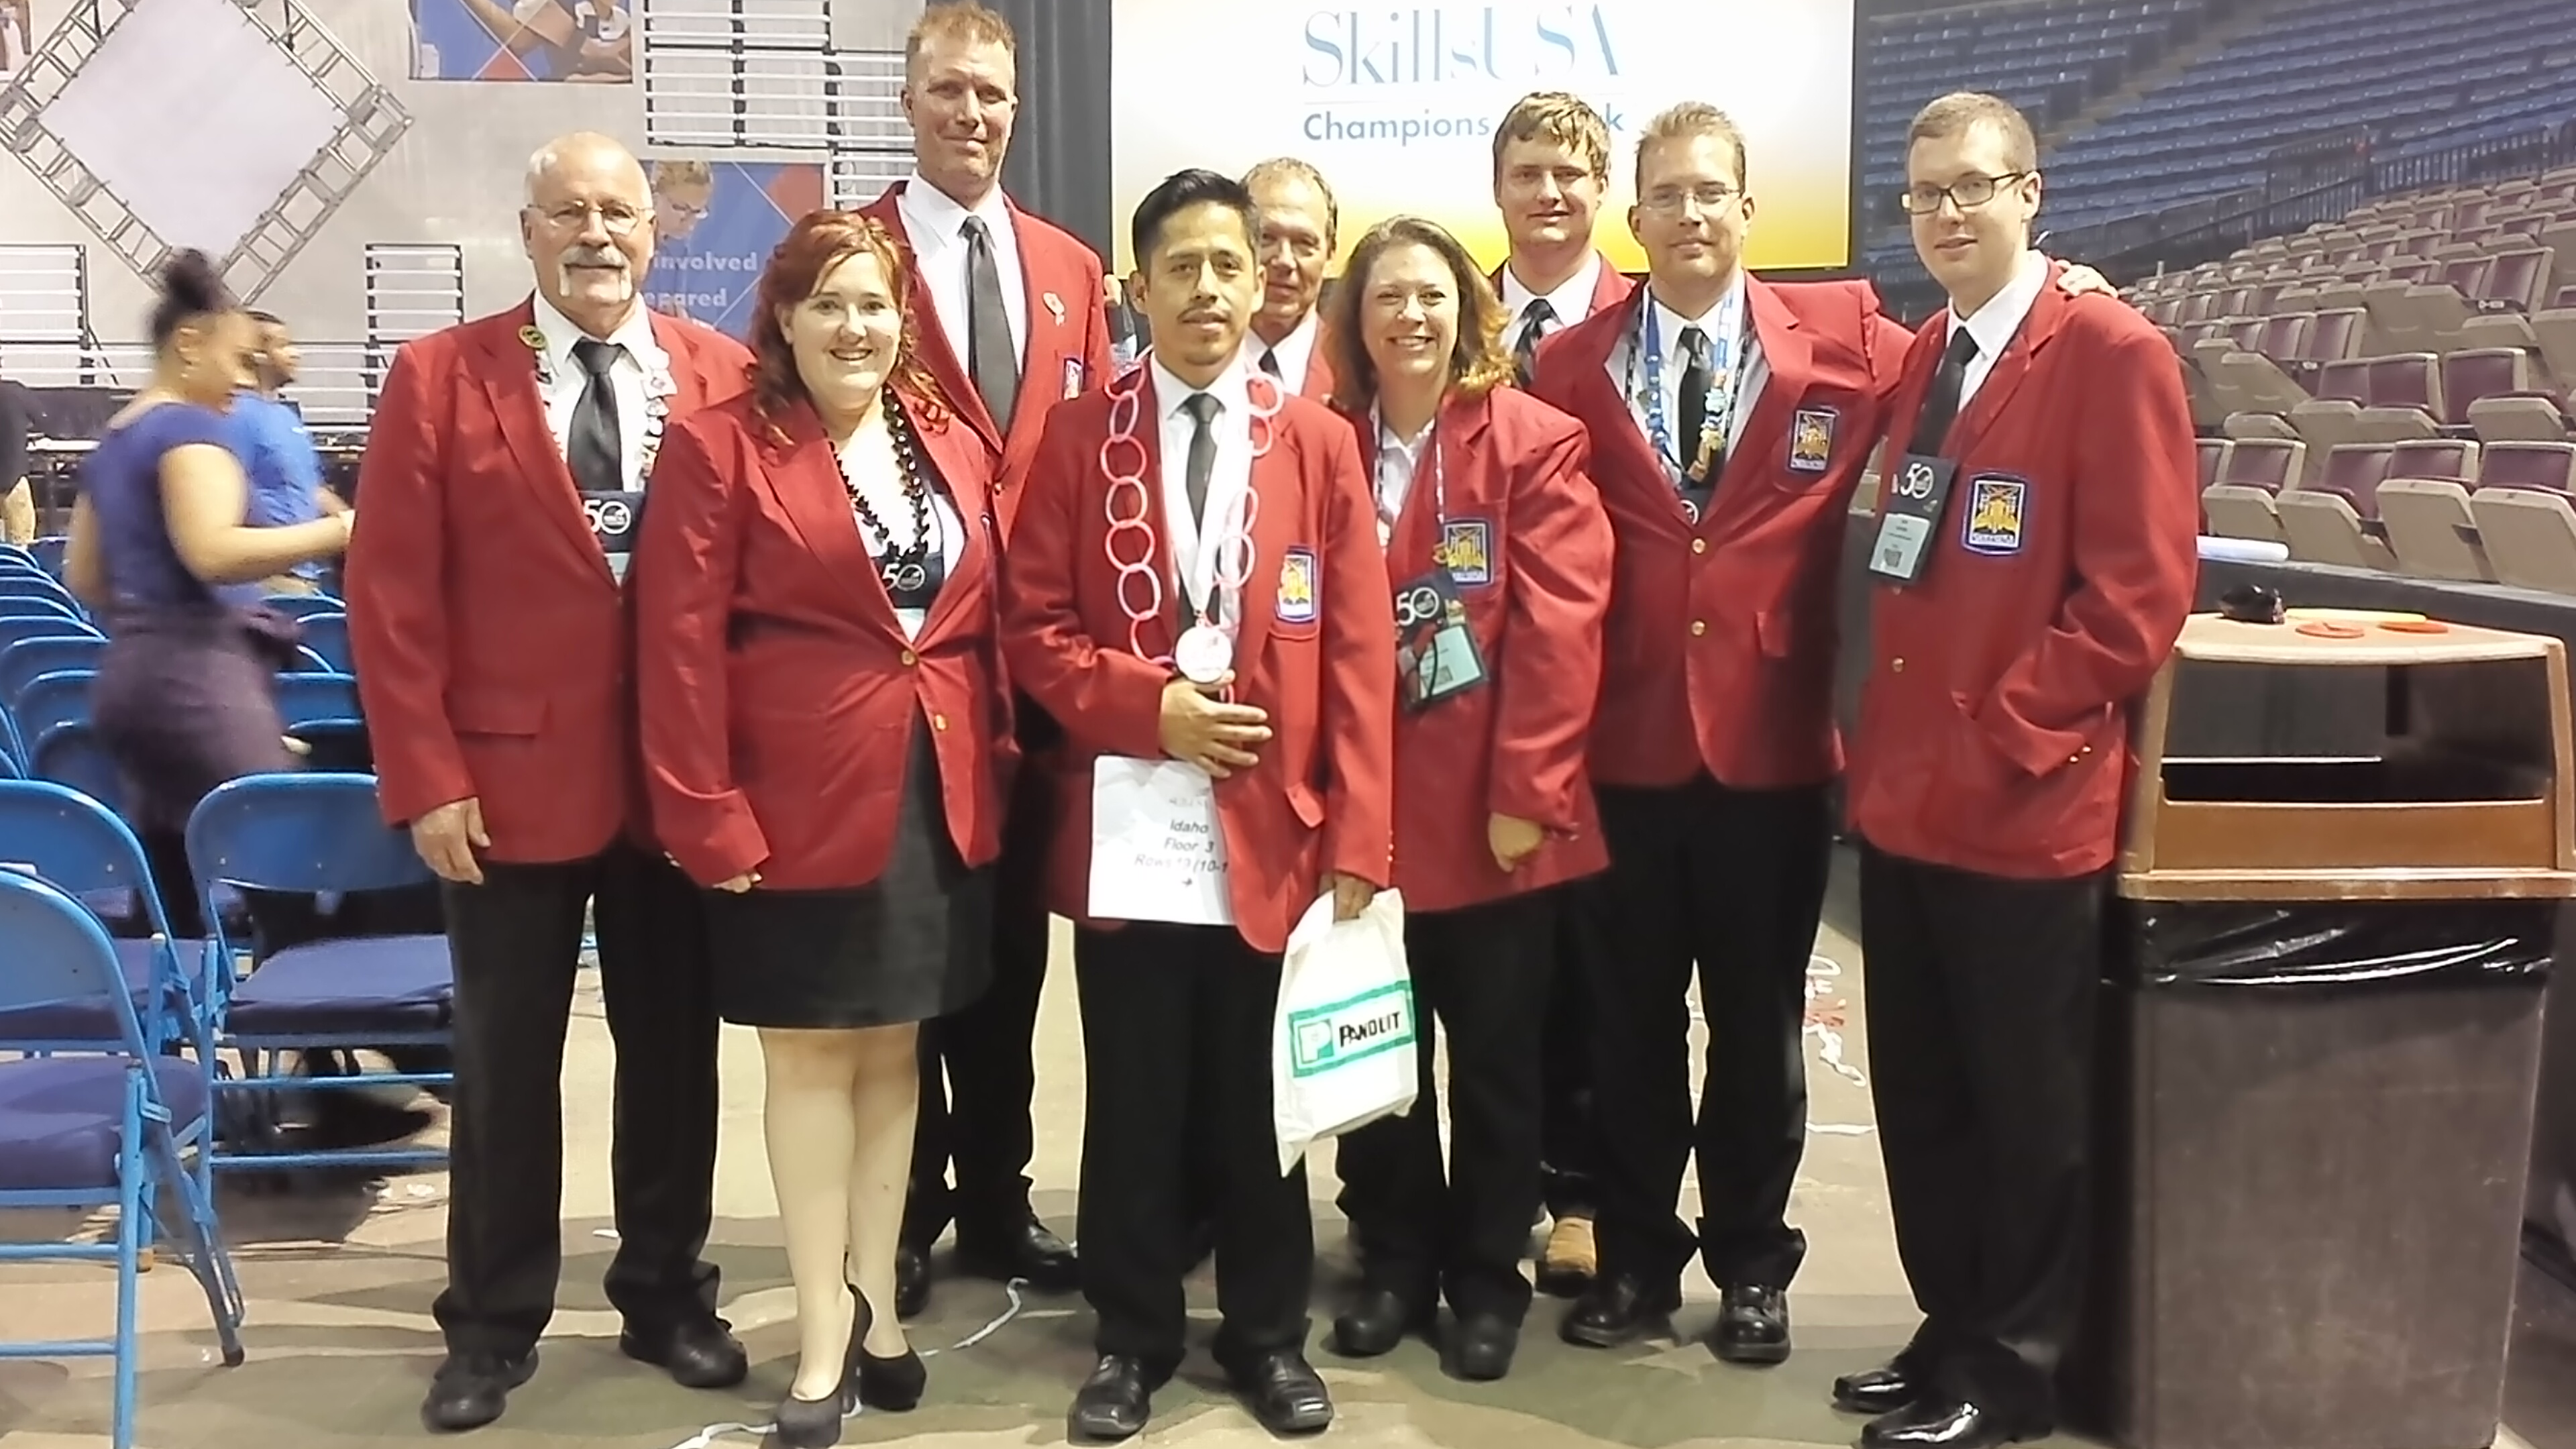 CWI sent seven students and two advisors to the national SkillsUSA conference.